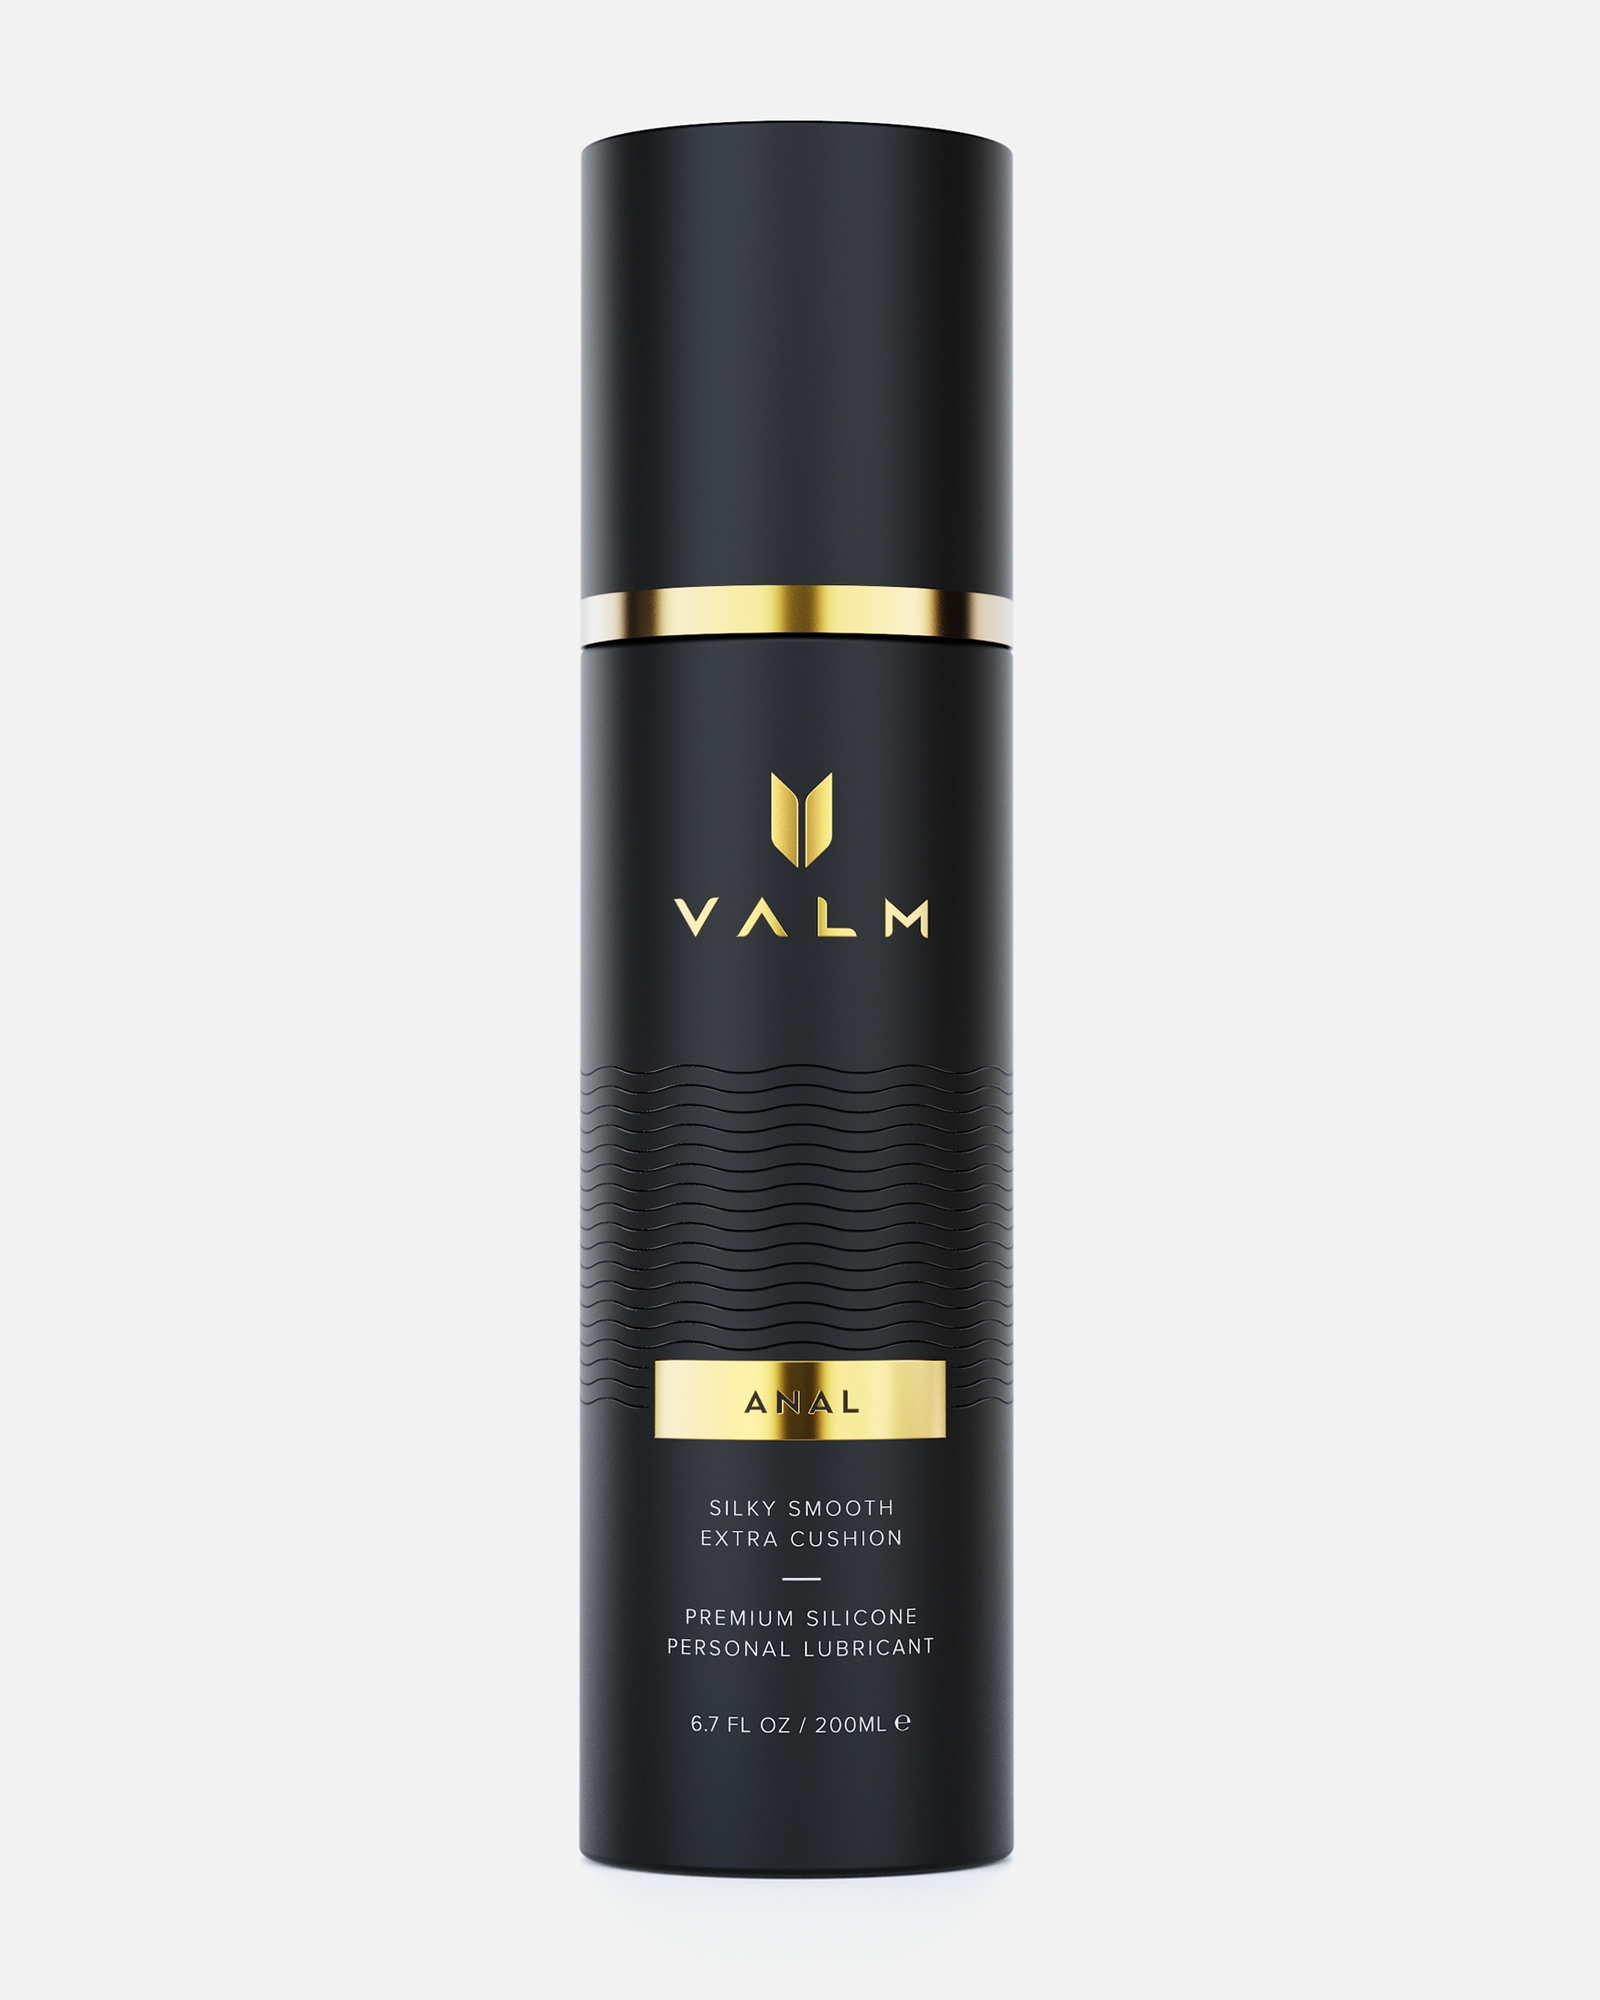 Valm Anal Lube Silicone Based Personal Lubricant 6.7oz 200ml